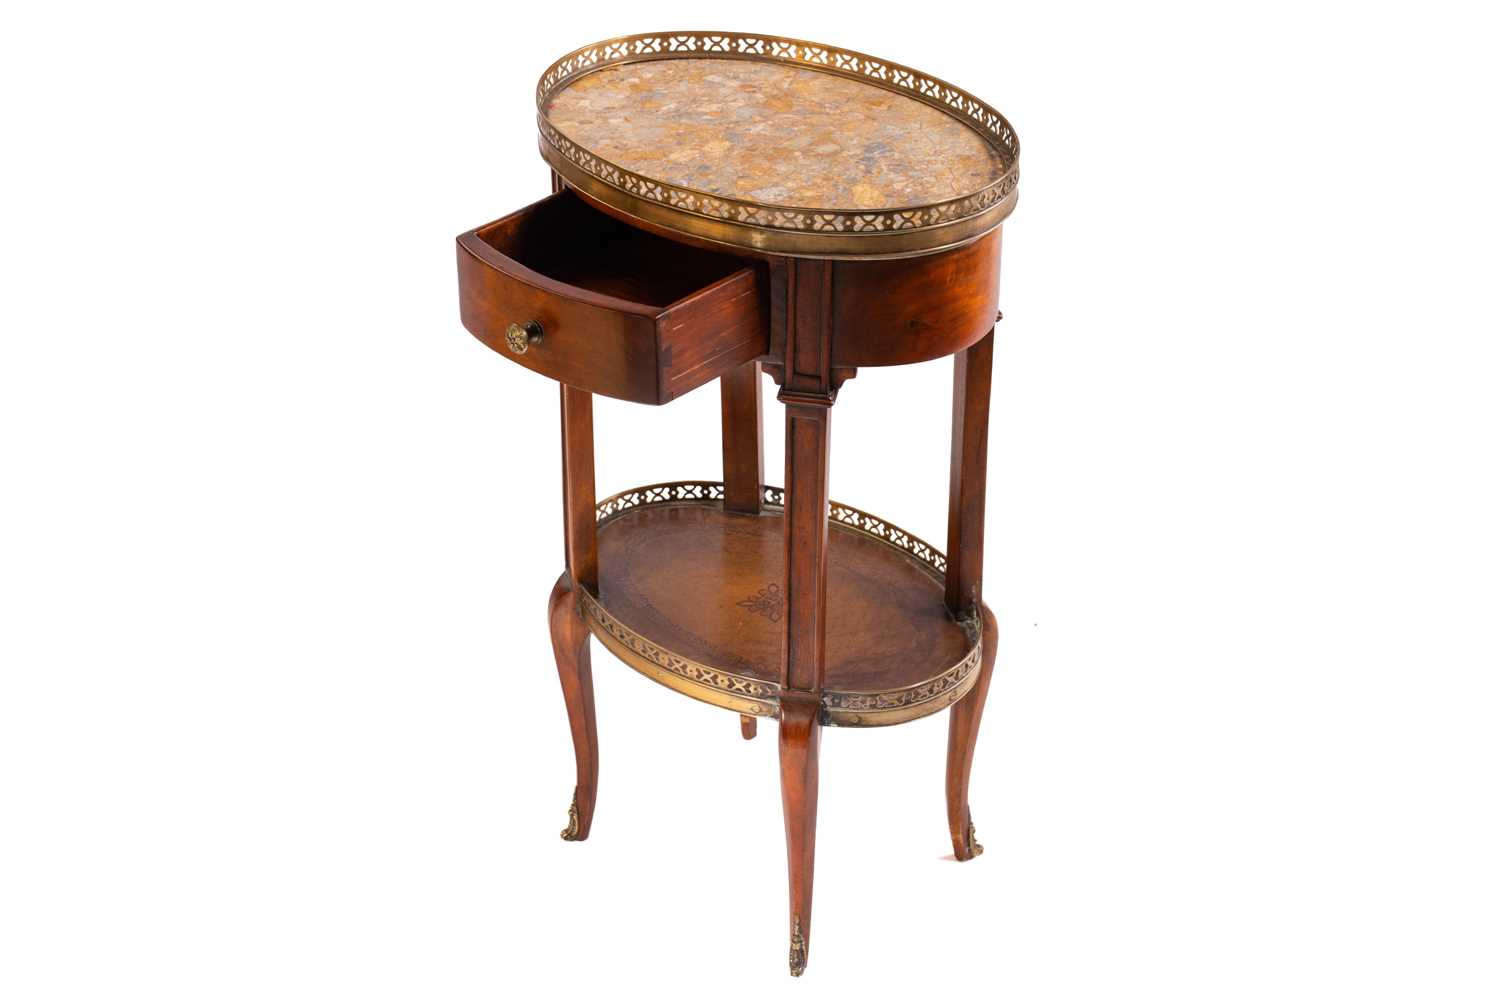 A French Napoleon III style mahogany oval table en chiffonier with marble top, 20th century, with - Image 3 of 10